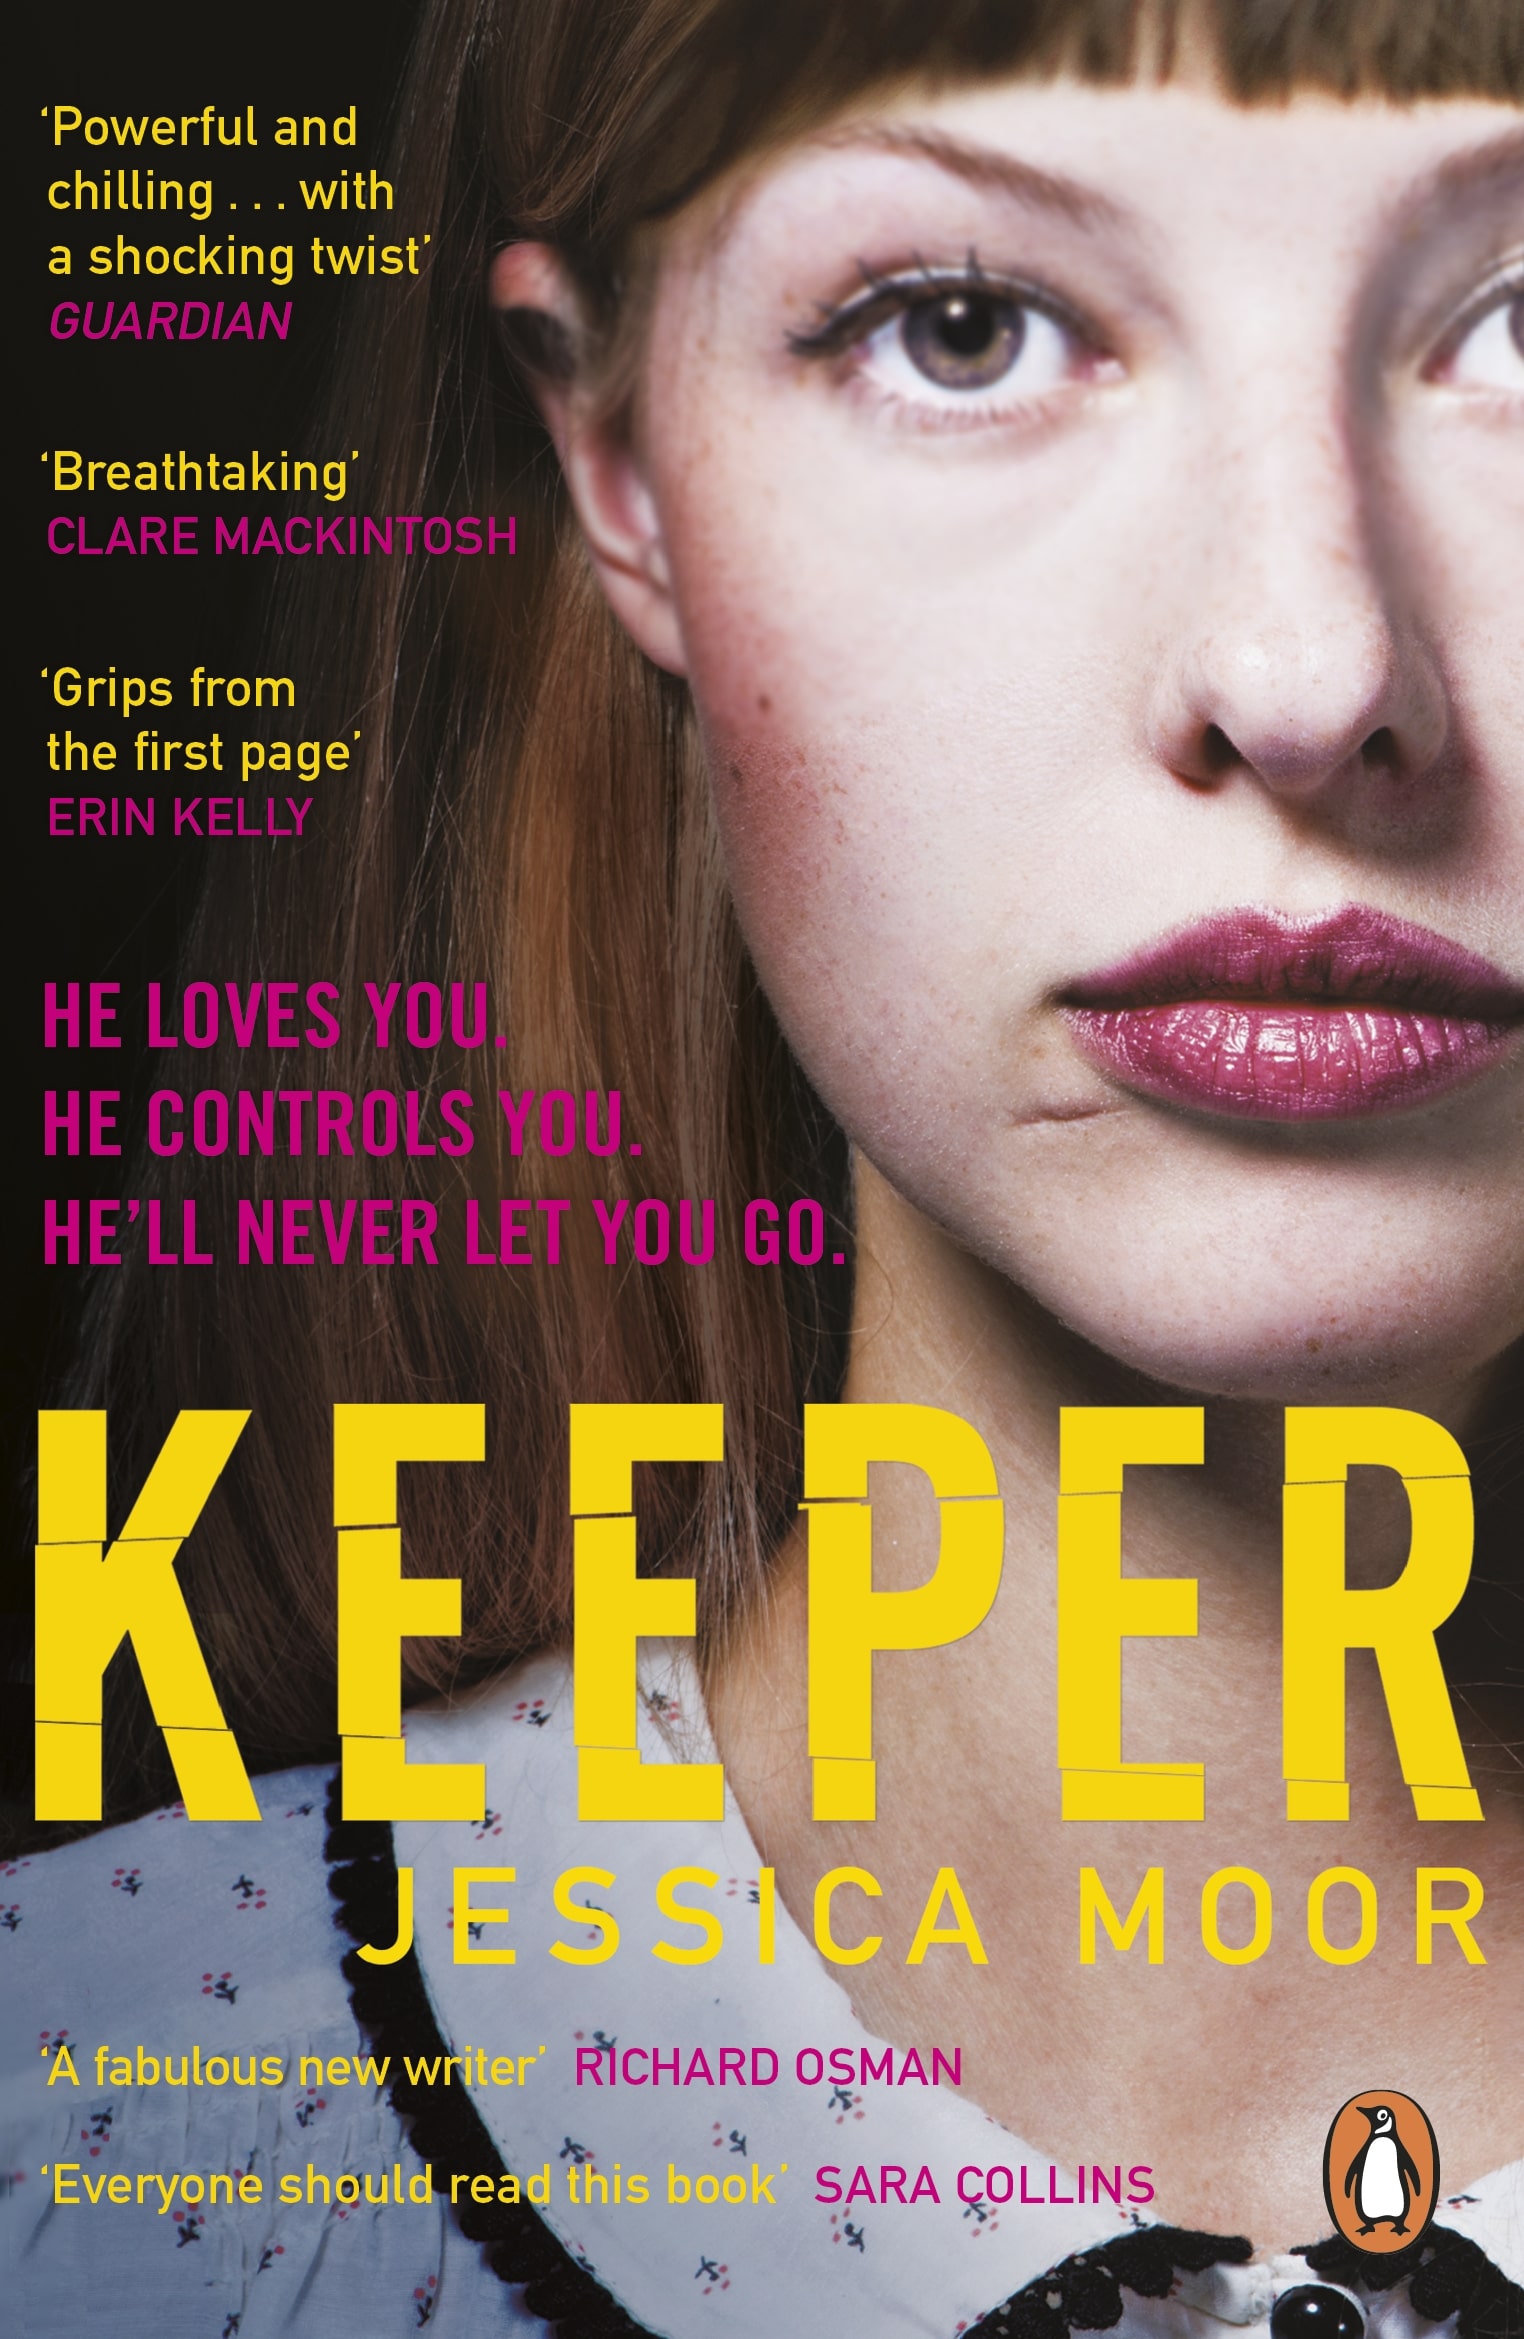 Book jacket of Keeper by Jessica Moor, one of the best paperback books out this month